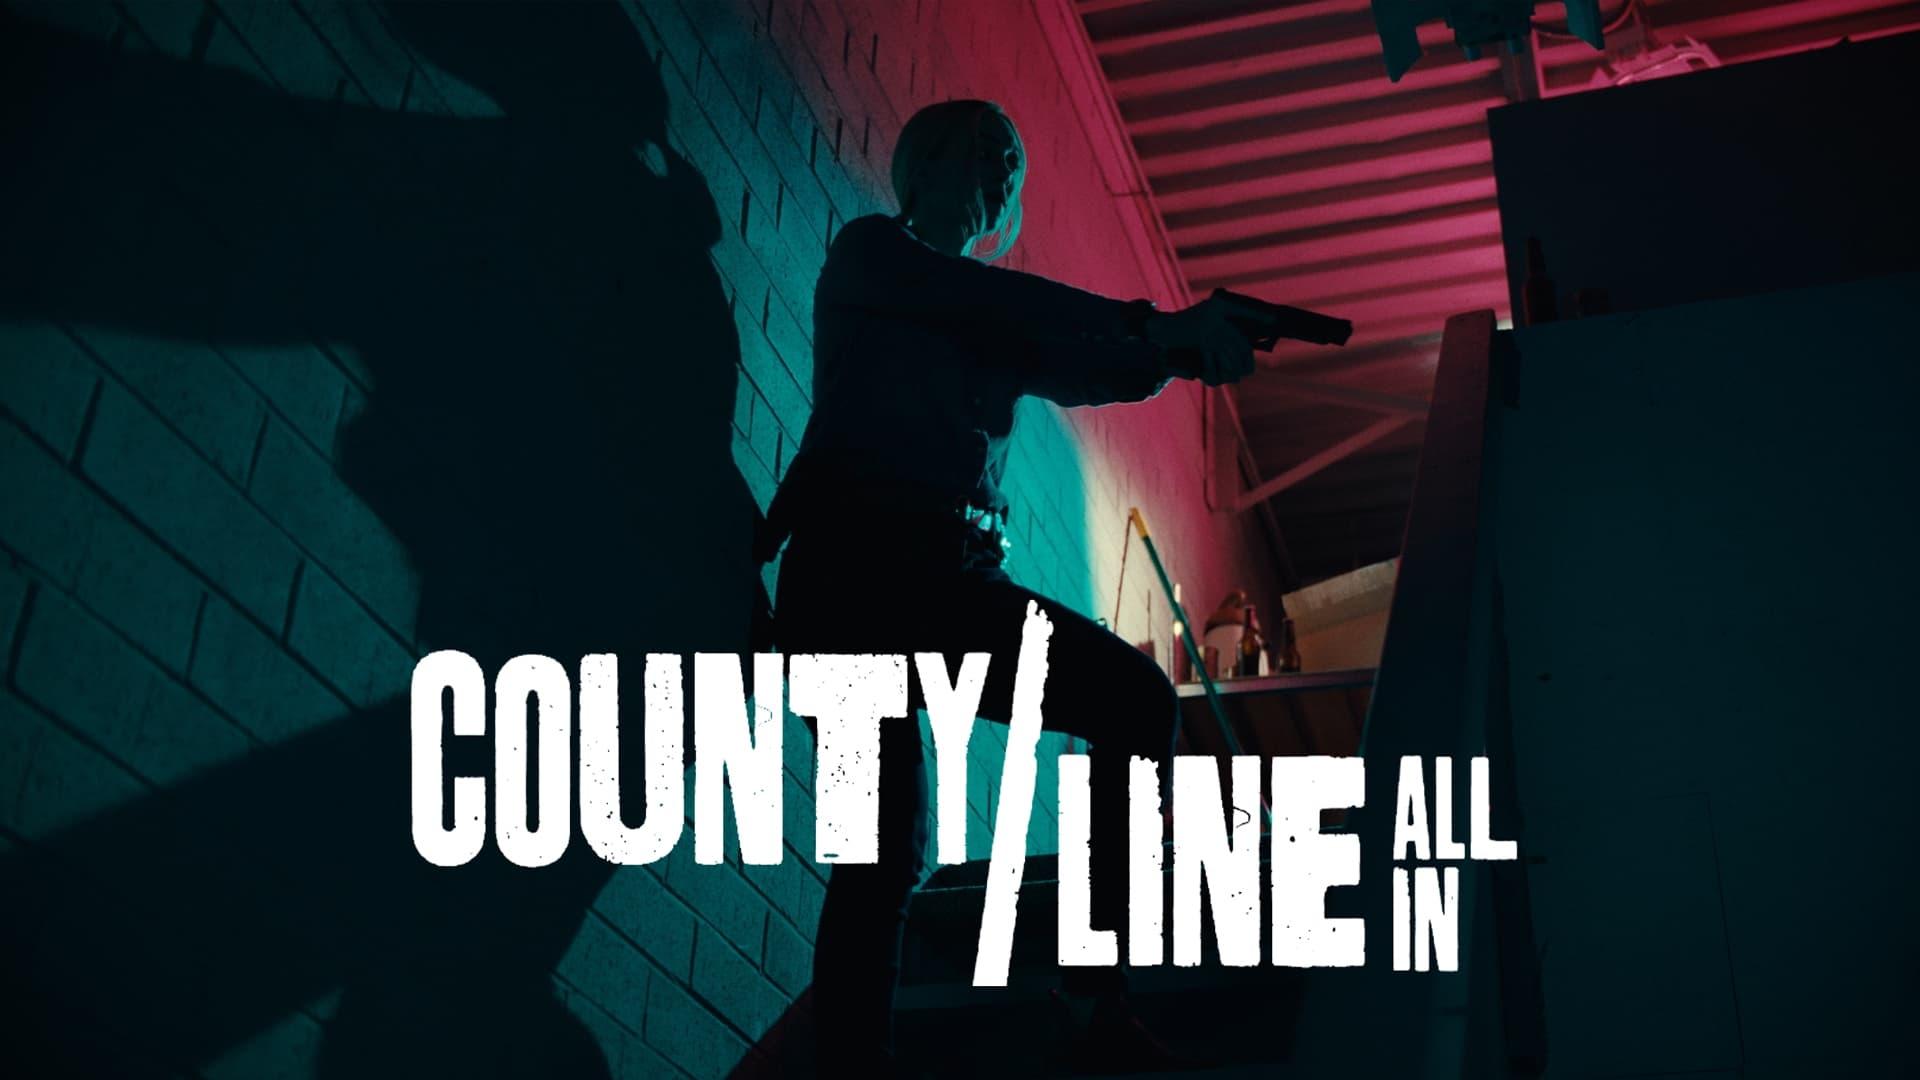 County Line: All In backdrop